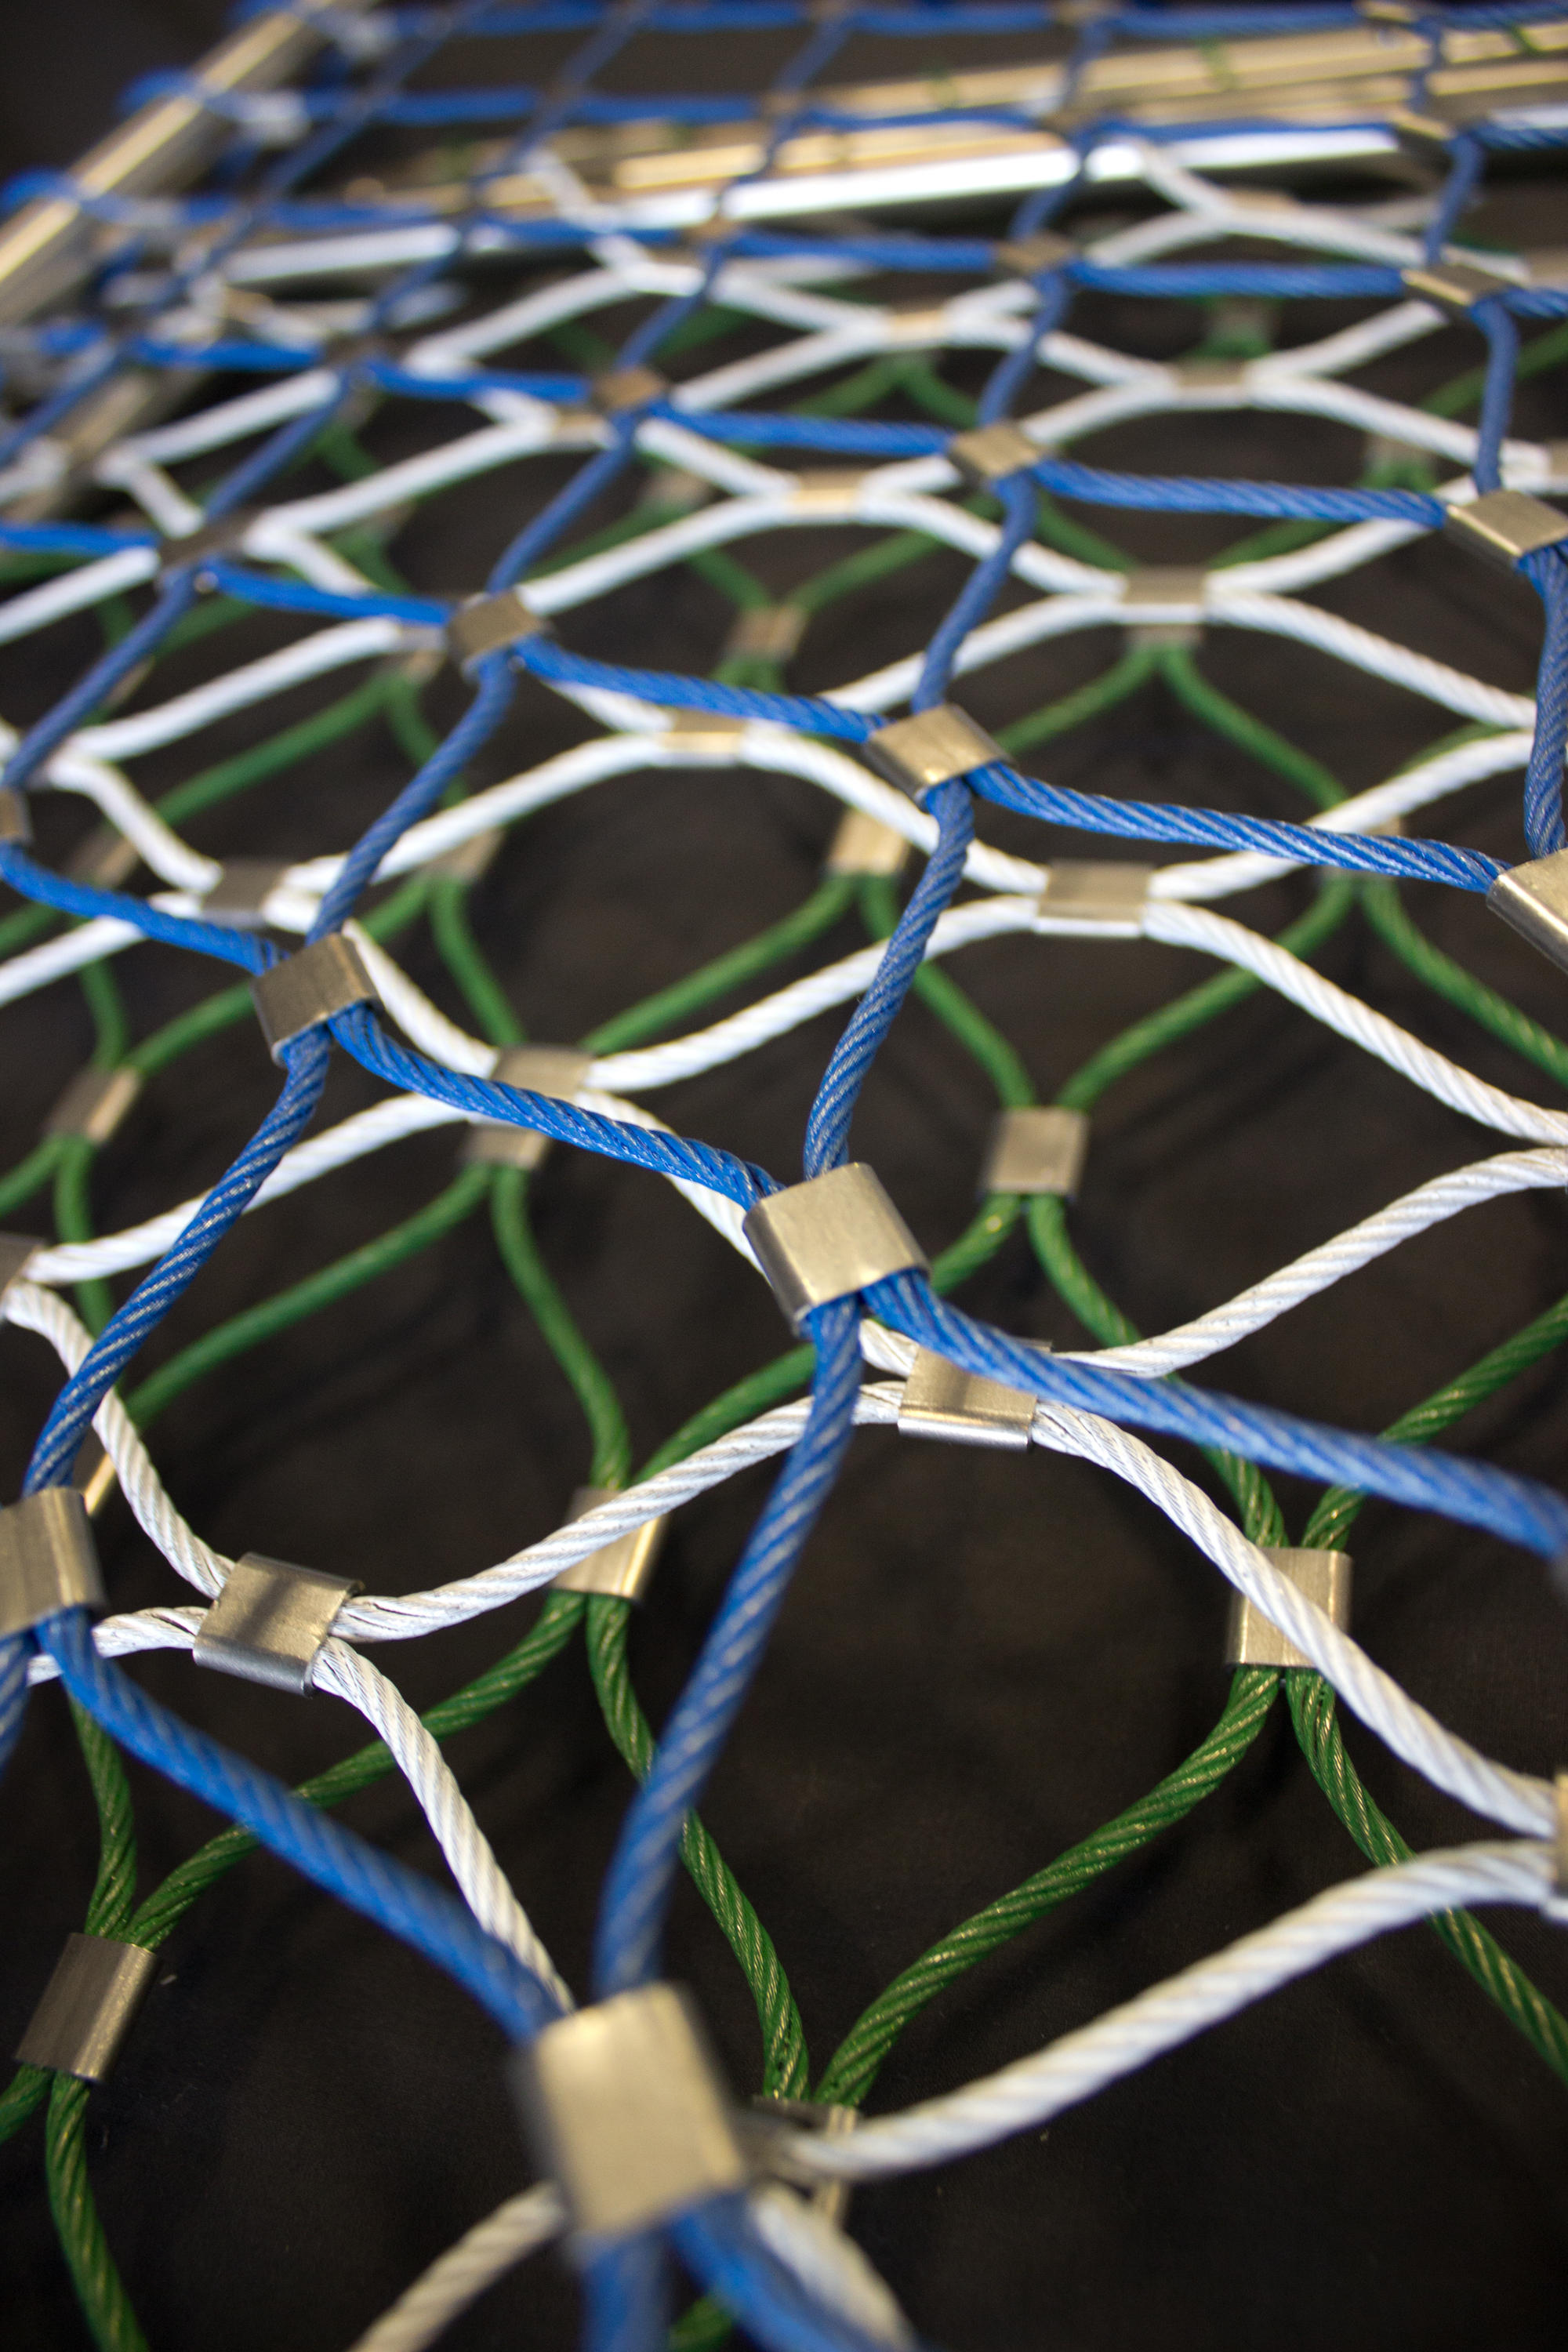 Can you customise stainless steel mesh netting?